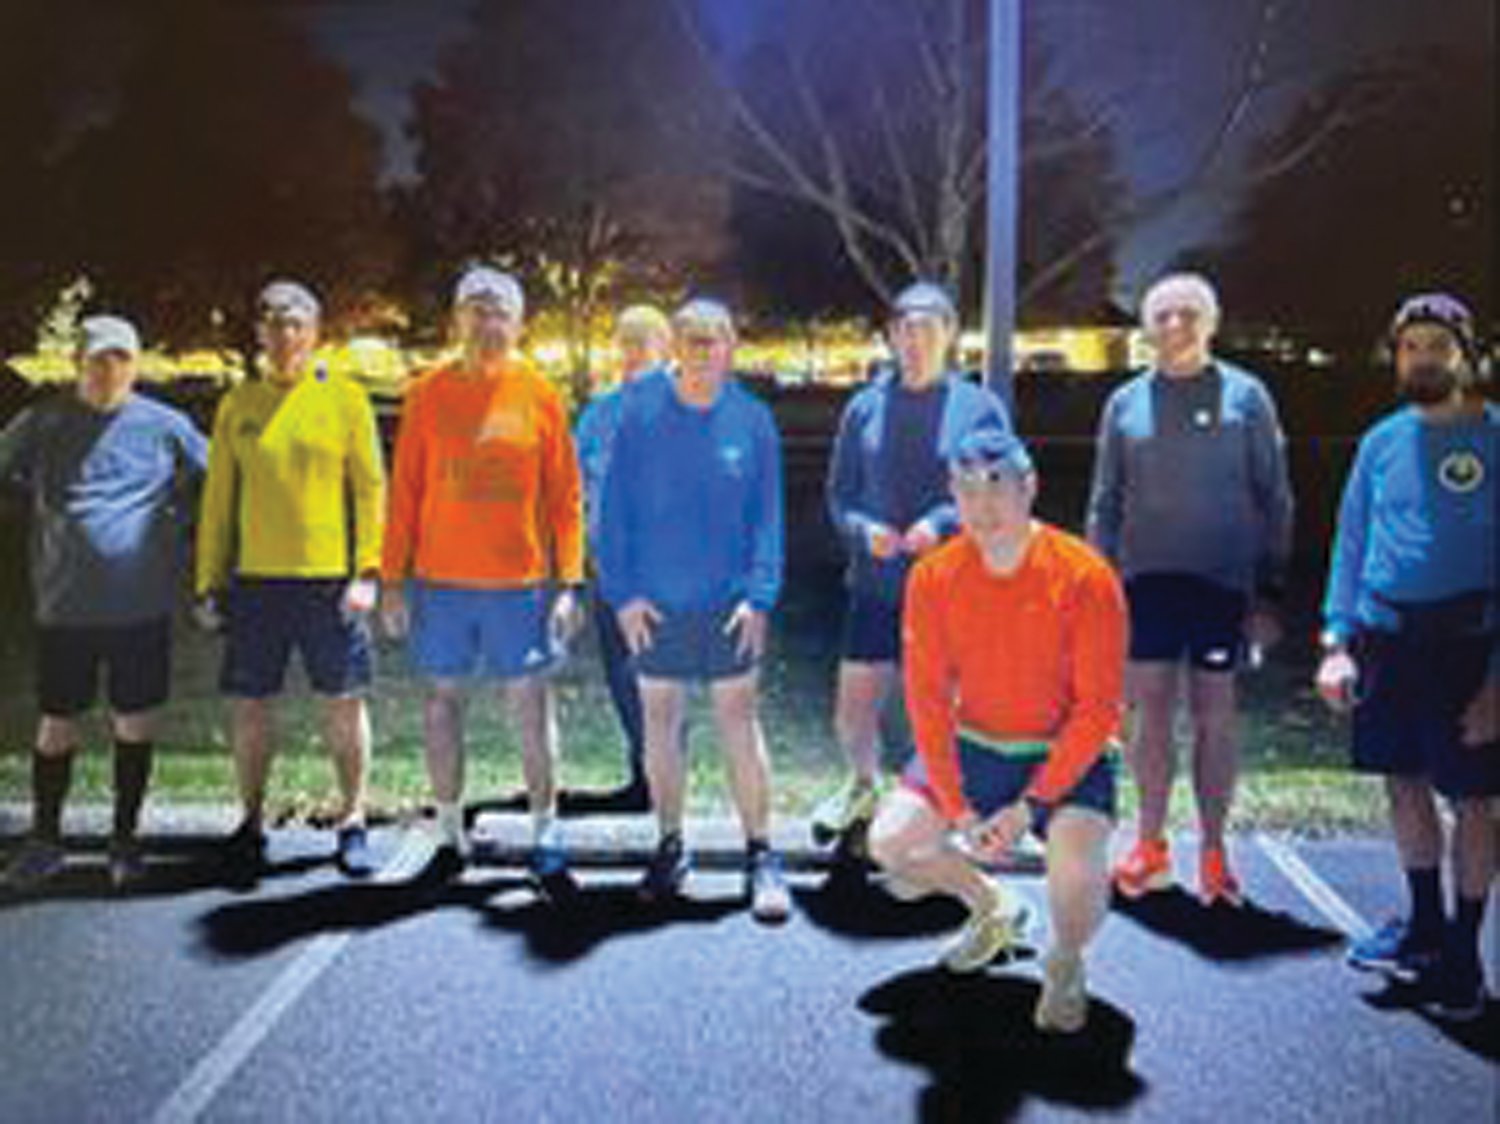 Joe Boyce
Even the BCRR McTuesday training group runners have been wearing shorts on winter nights due to moderate temperatures.